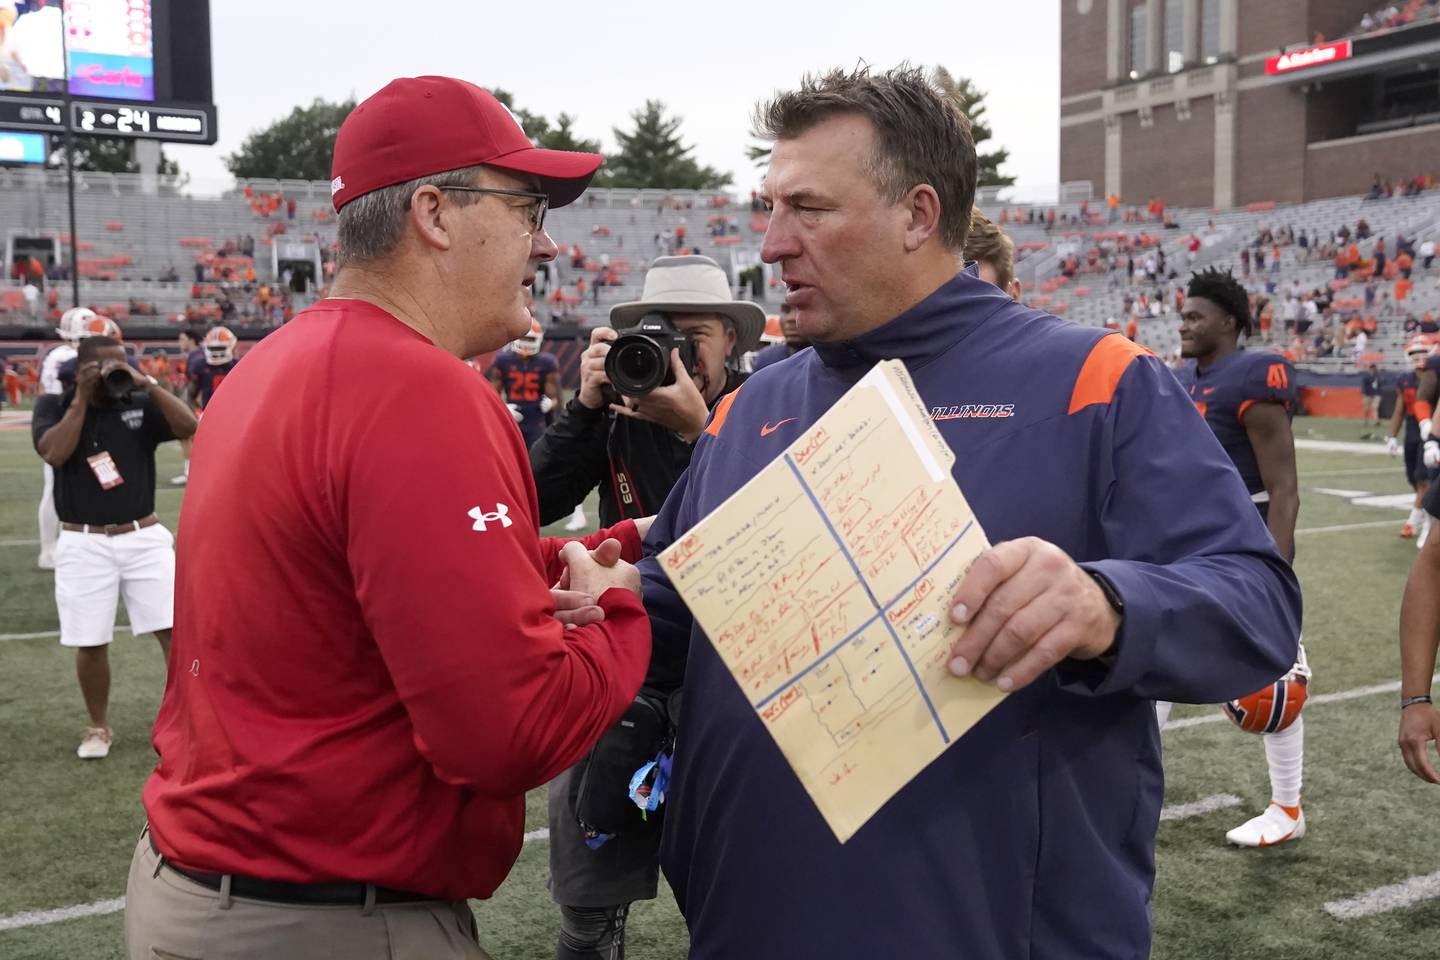 Wisconsin coach Paul Chryst, left, and Illinois coach Bret Bielema meet after the Badgers' 24-0 victory on Oct. 9, 2021, in Champaign.